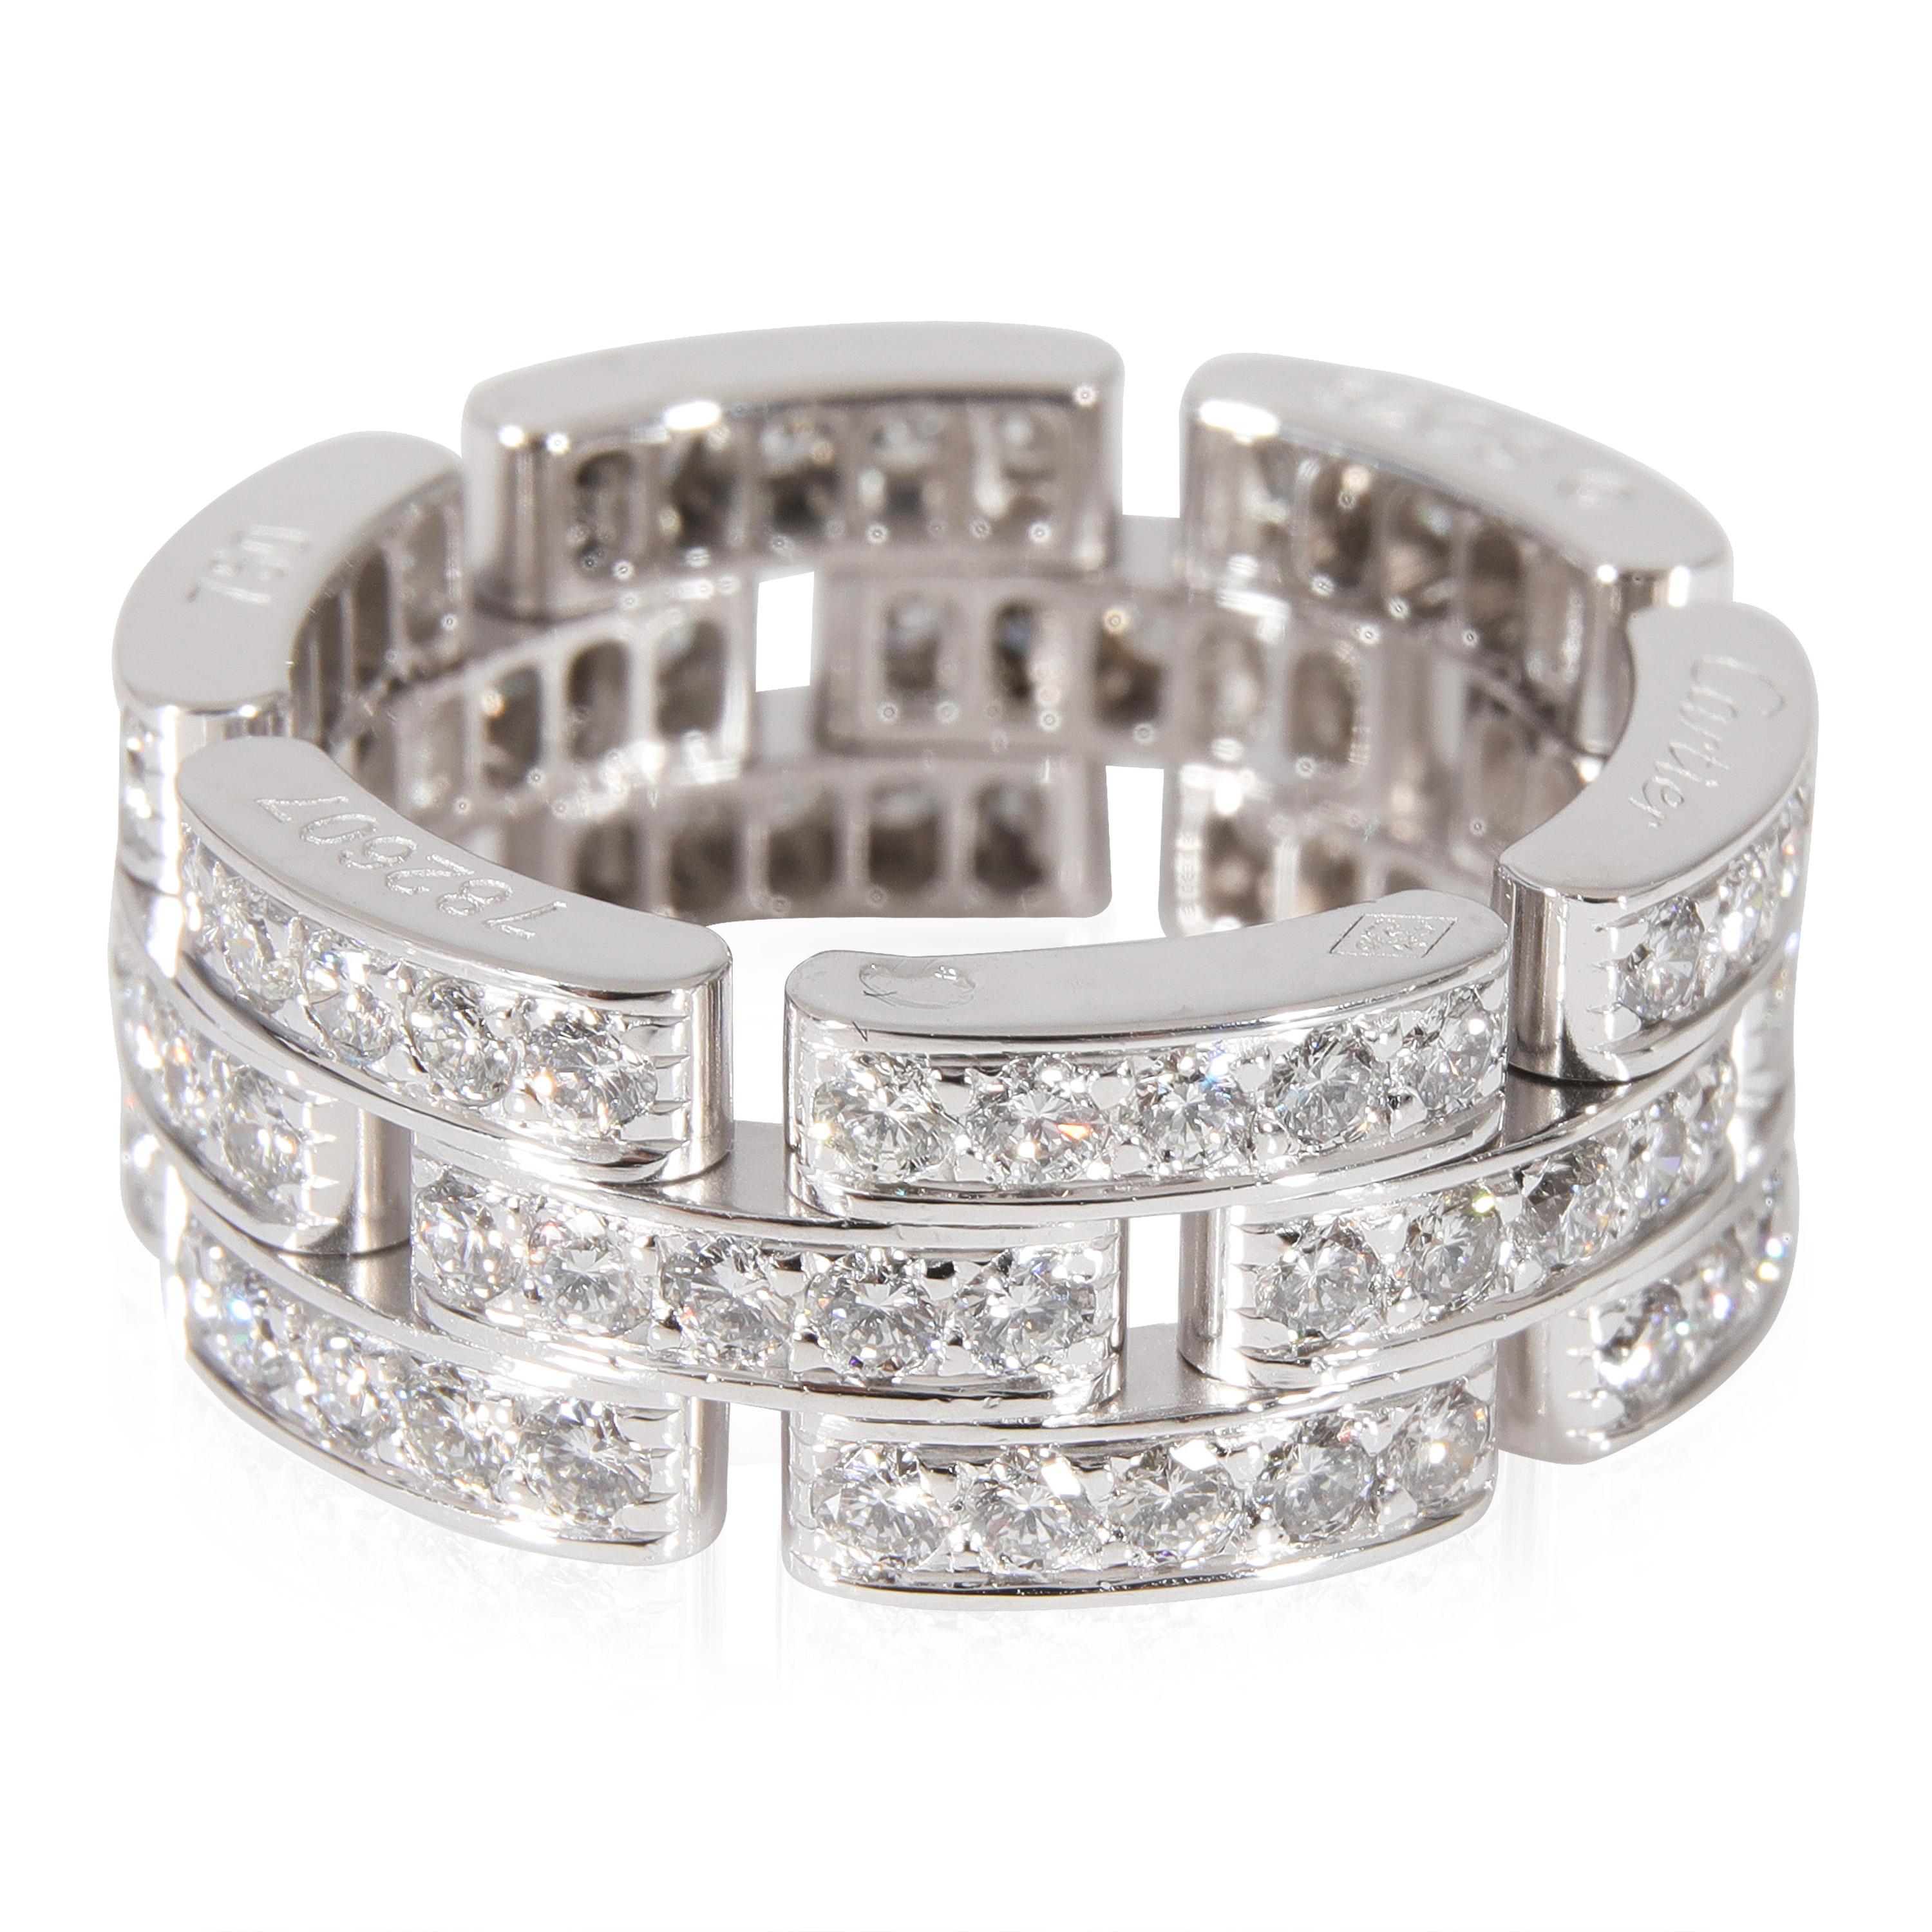 Women's or Men's Cartier Maillon Panthere Diamond Ring in 18KT White Gold 1.37 CTW For Sale